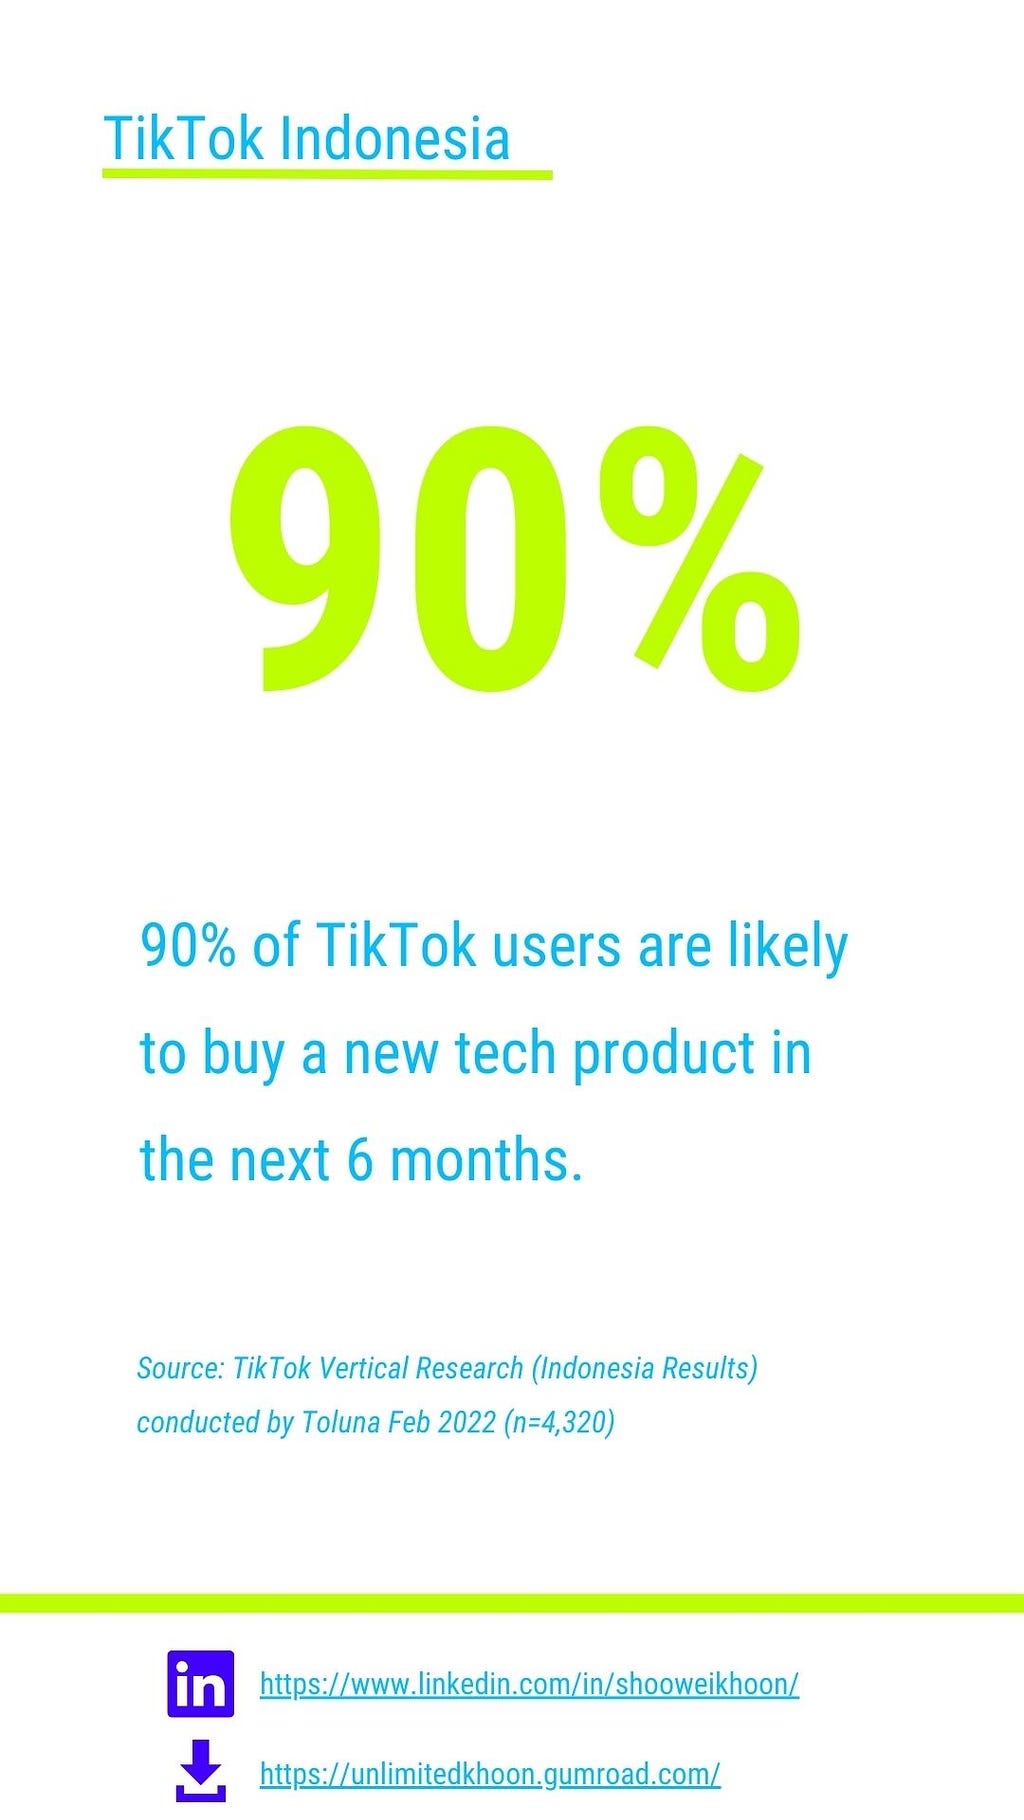 90% of TikTok users are likely to buy a new tech product in the next 6 months.